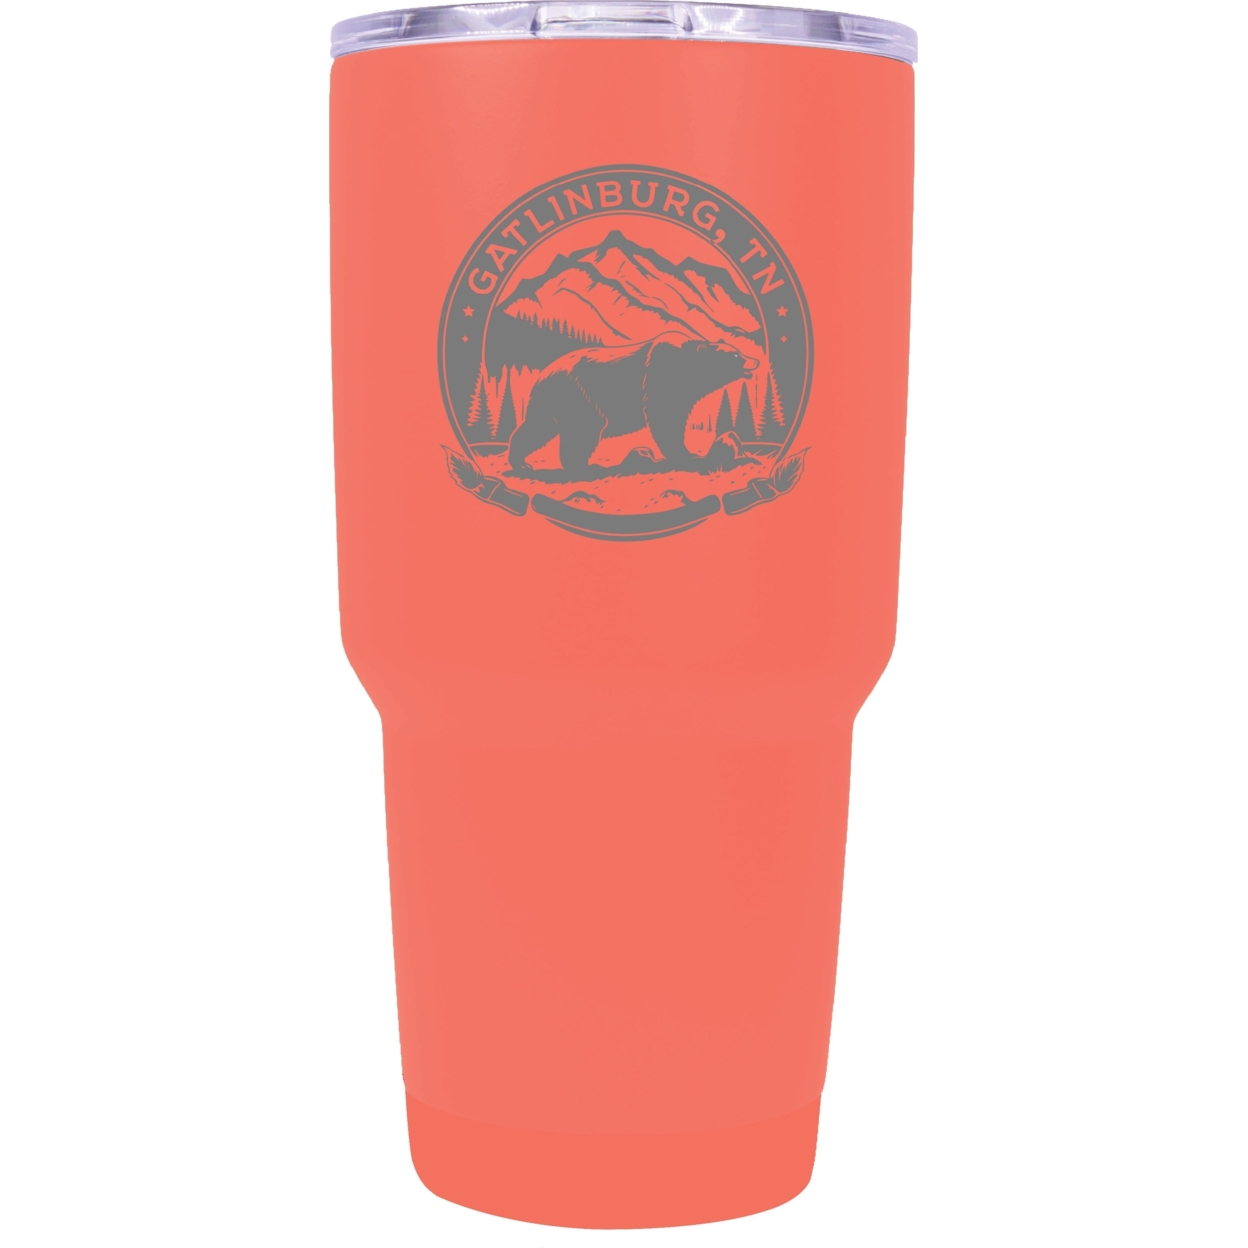 Gatlinburg Tennessee Laser Etched Souvenir 24 Oz Insulated Stainless Steel Tumbler - Red